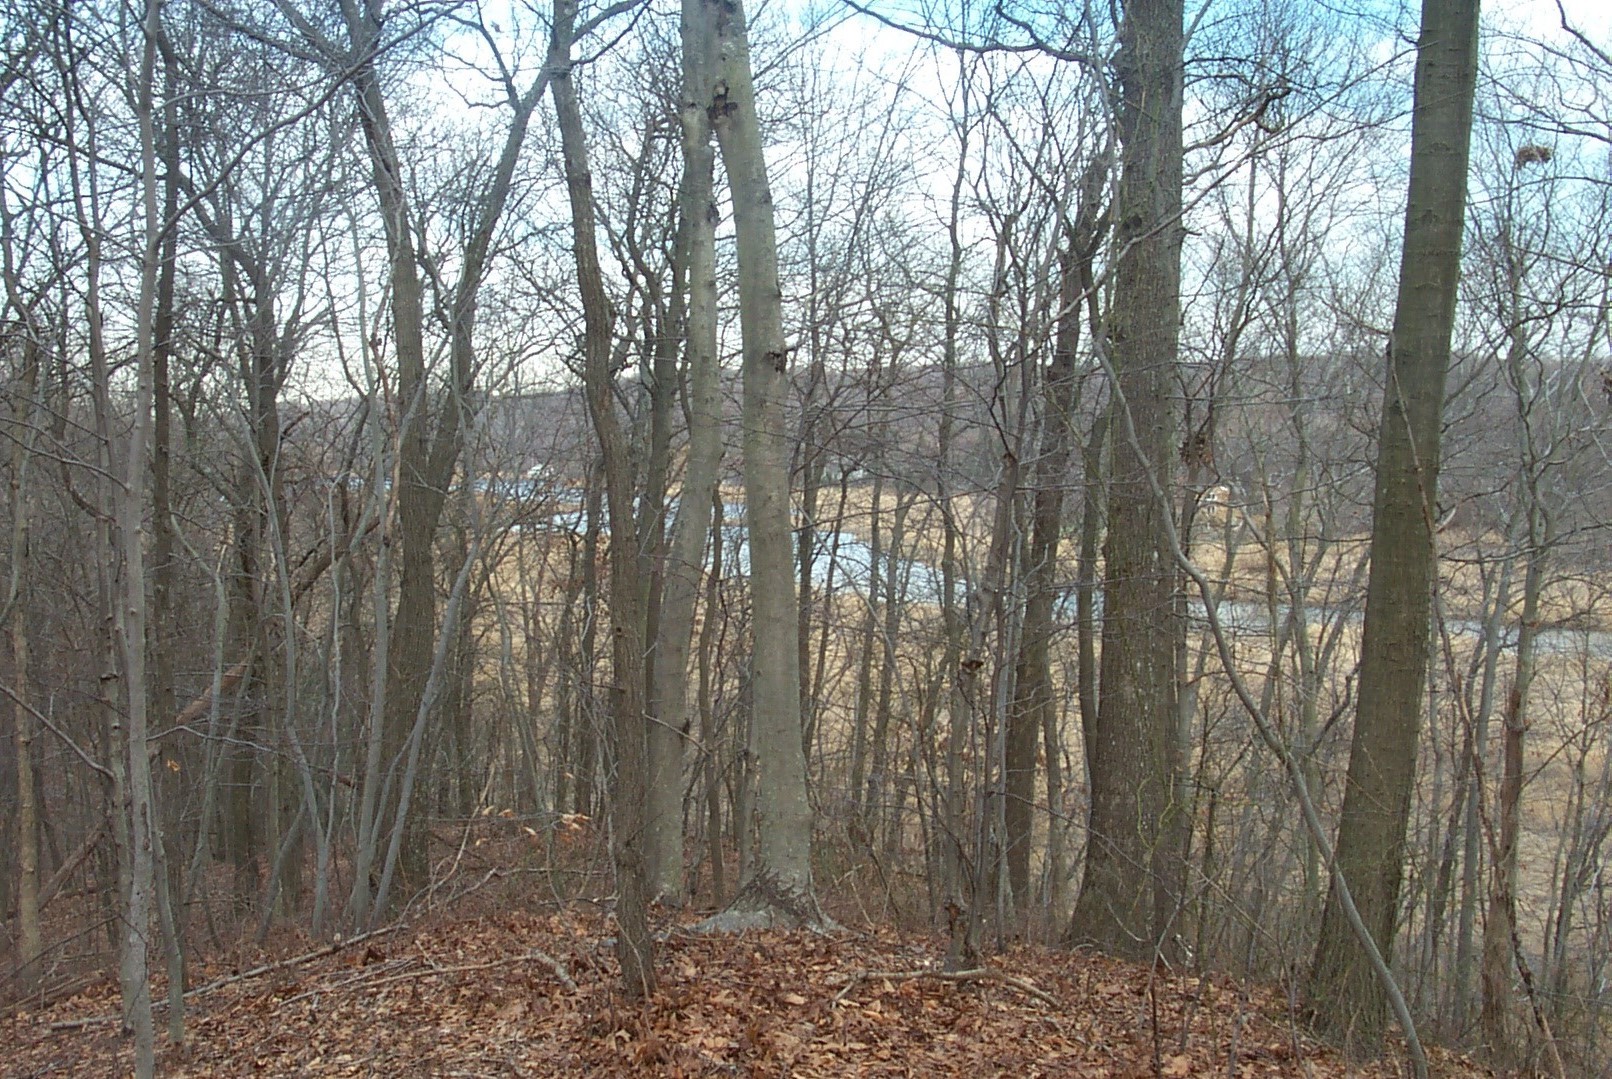 View of the Nissequogue River